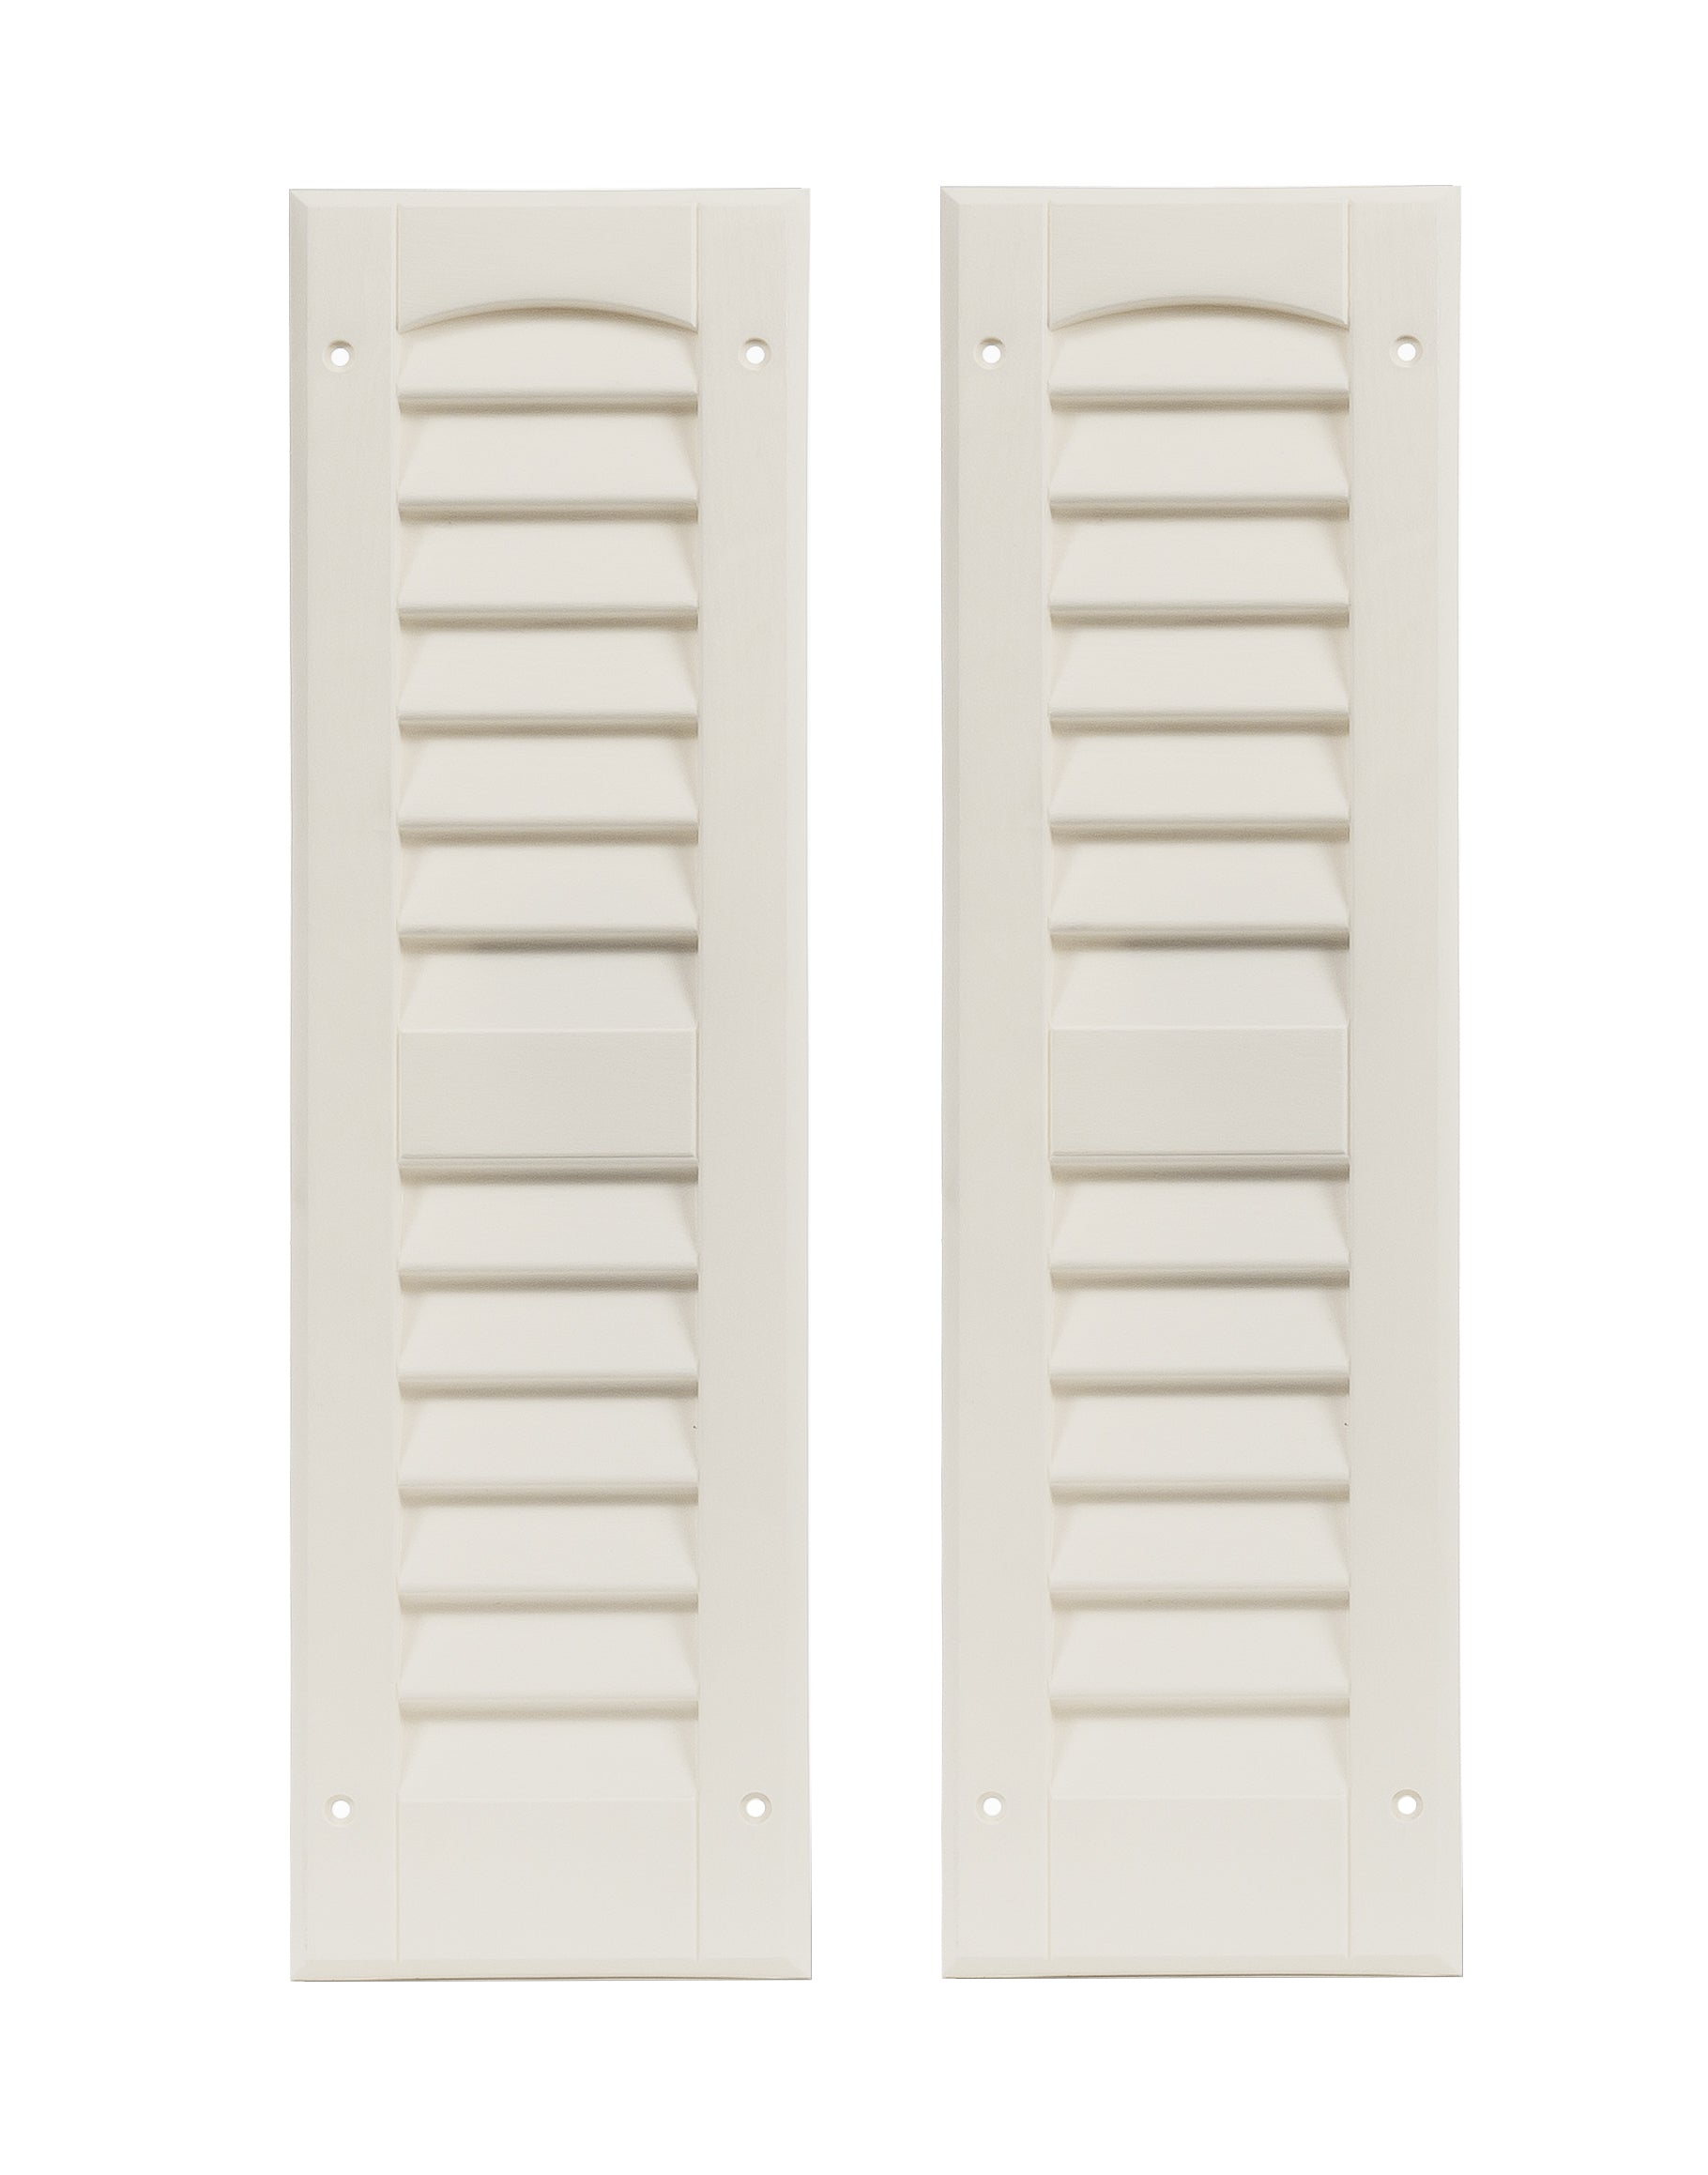 Pair of 6" W x 21" H Louvered White Shutters for Sheds, Playhouses, and MORE 